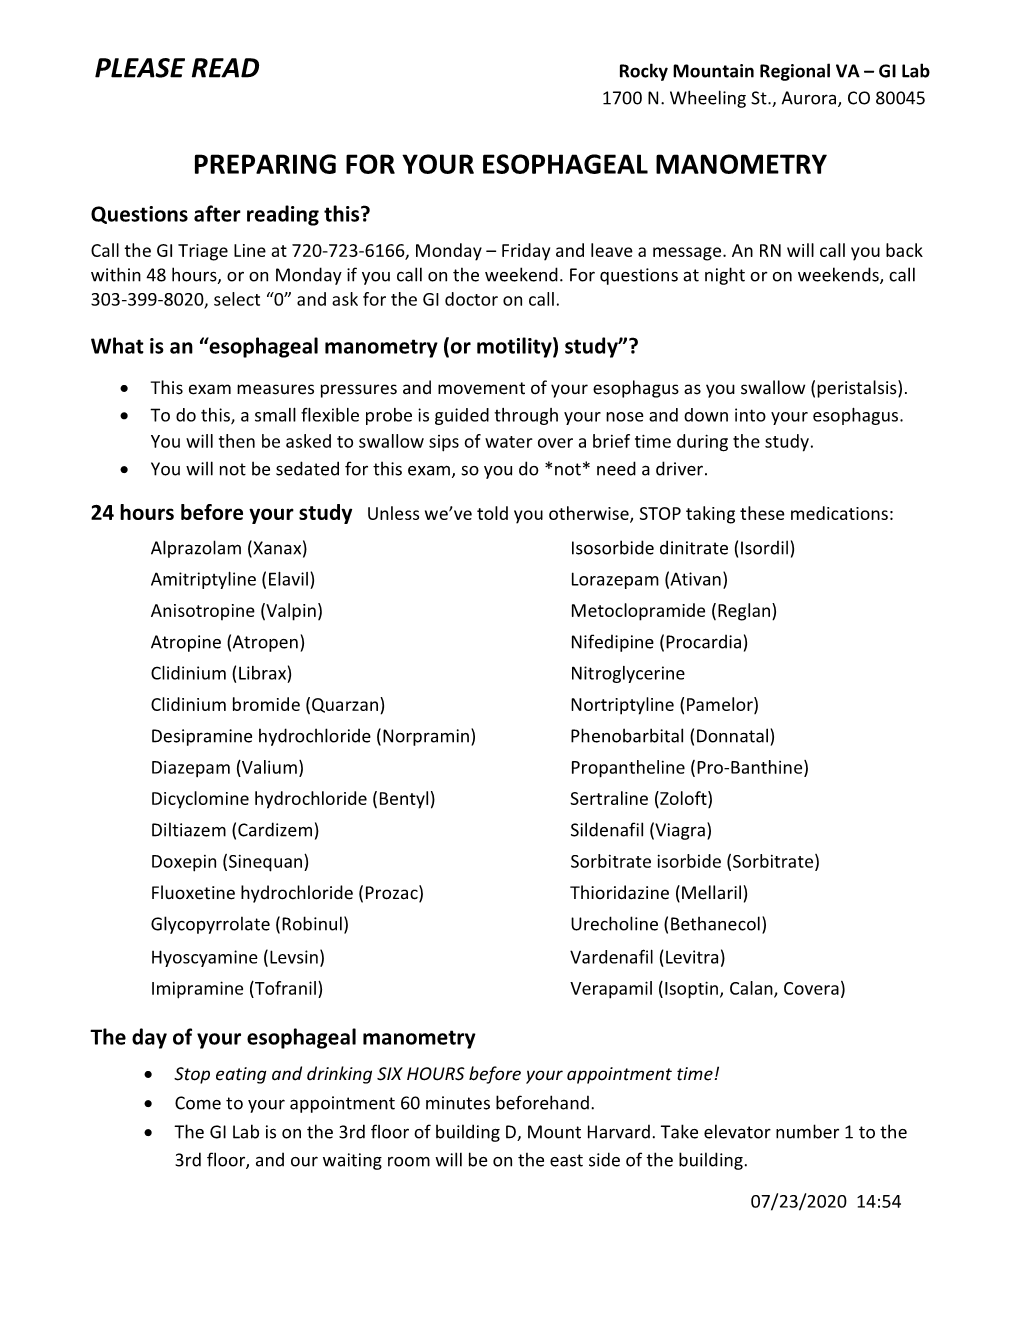 Please Read Preparing for Your Esophageal Manometry